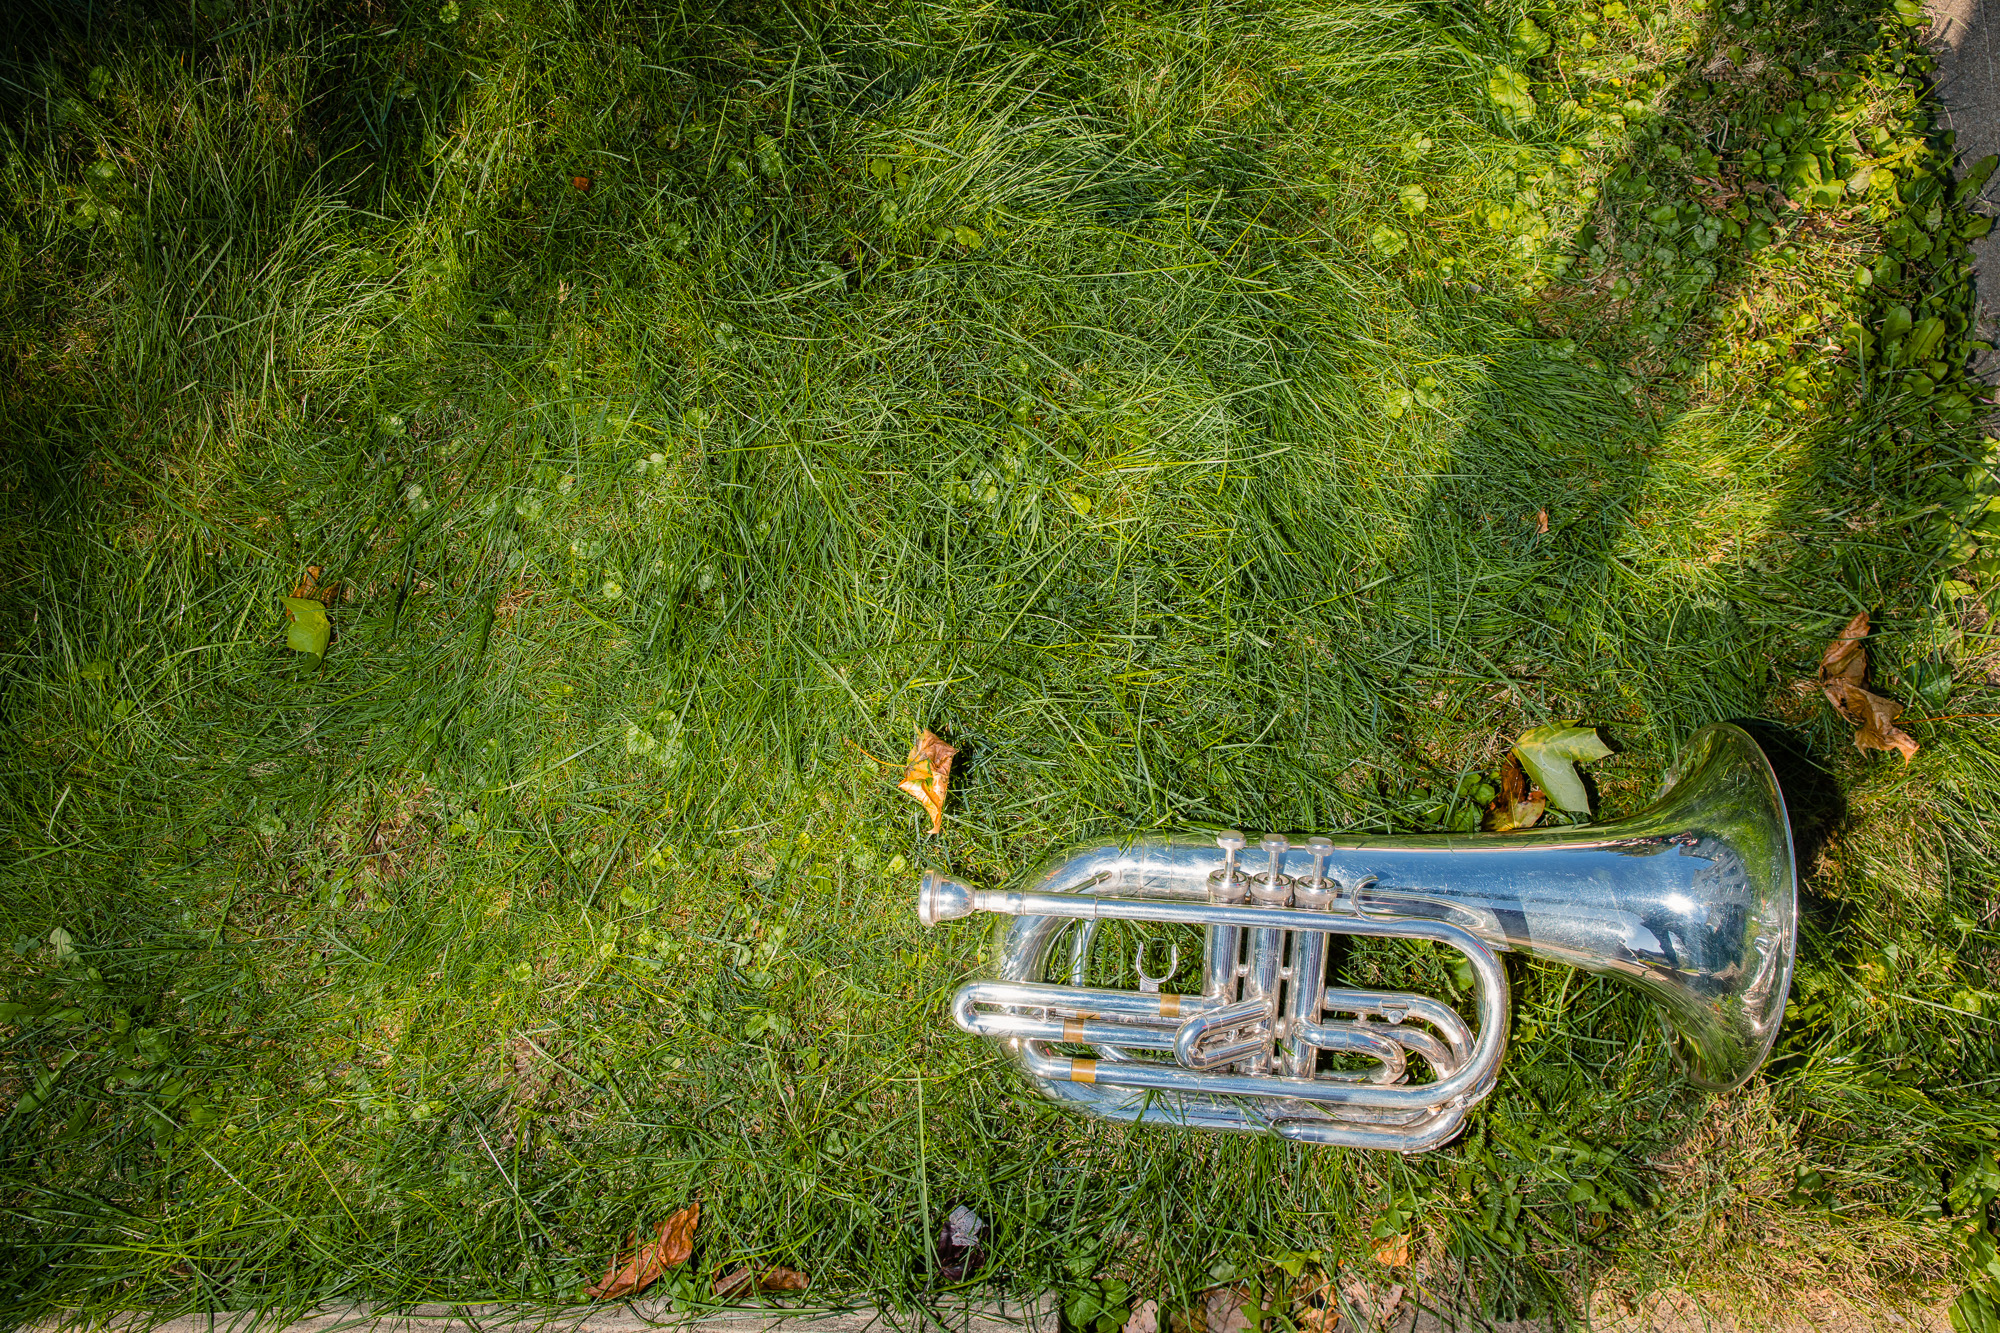 A trumpet belonging to a member of the IUP marching band lies in the grass.